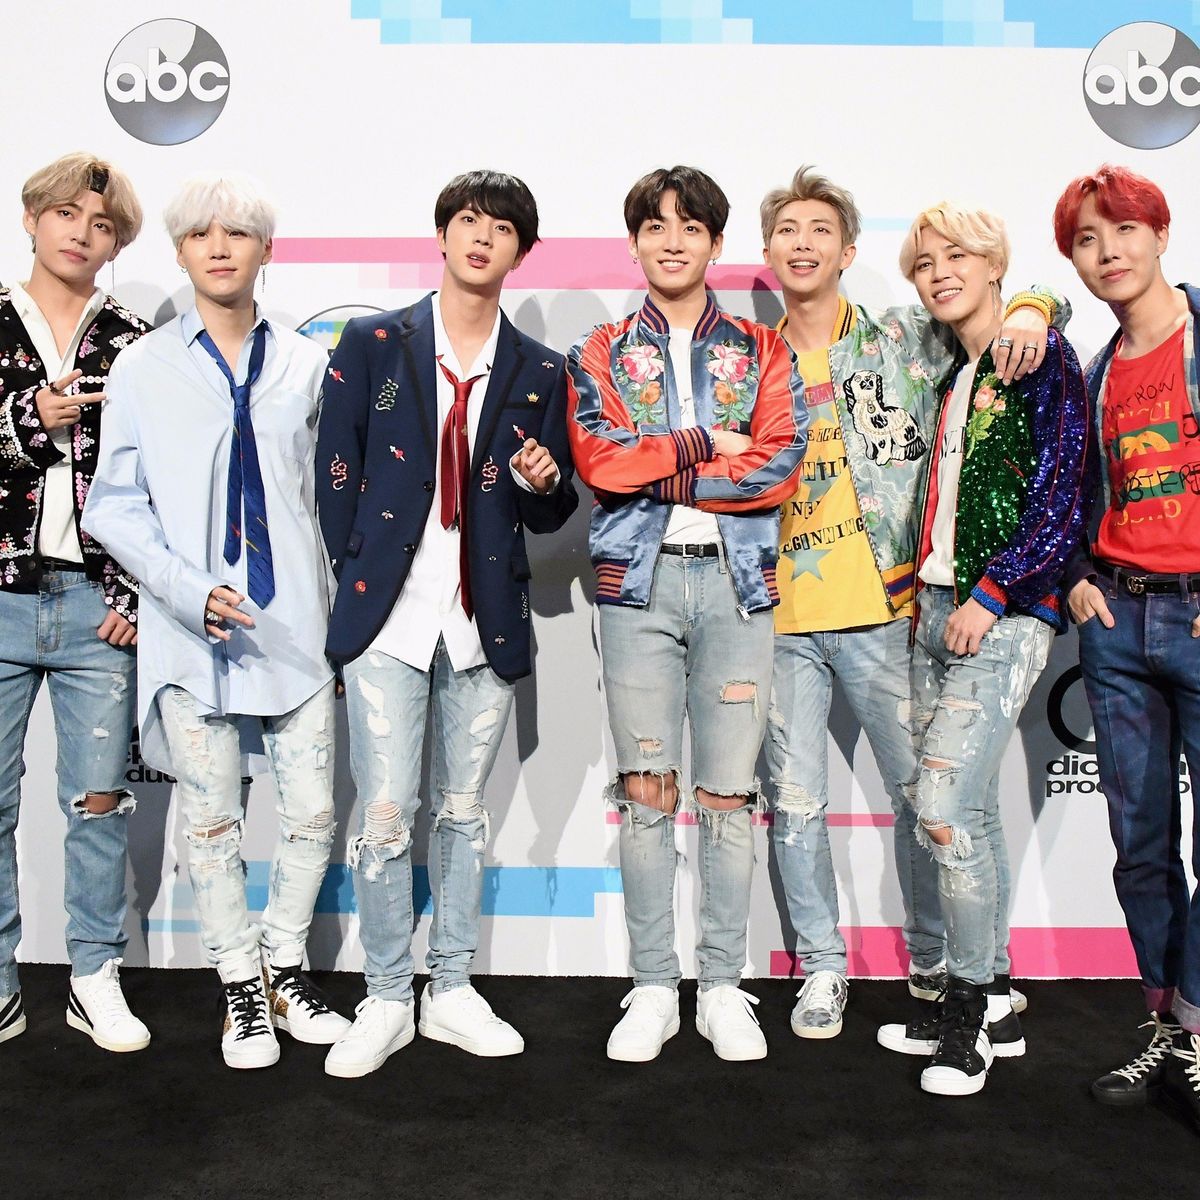 The American A.R.M.Y: Why BTS Is Bigger Than K-Pop